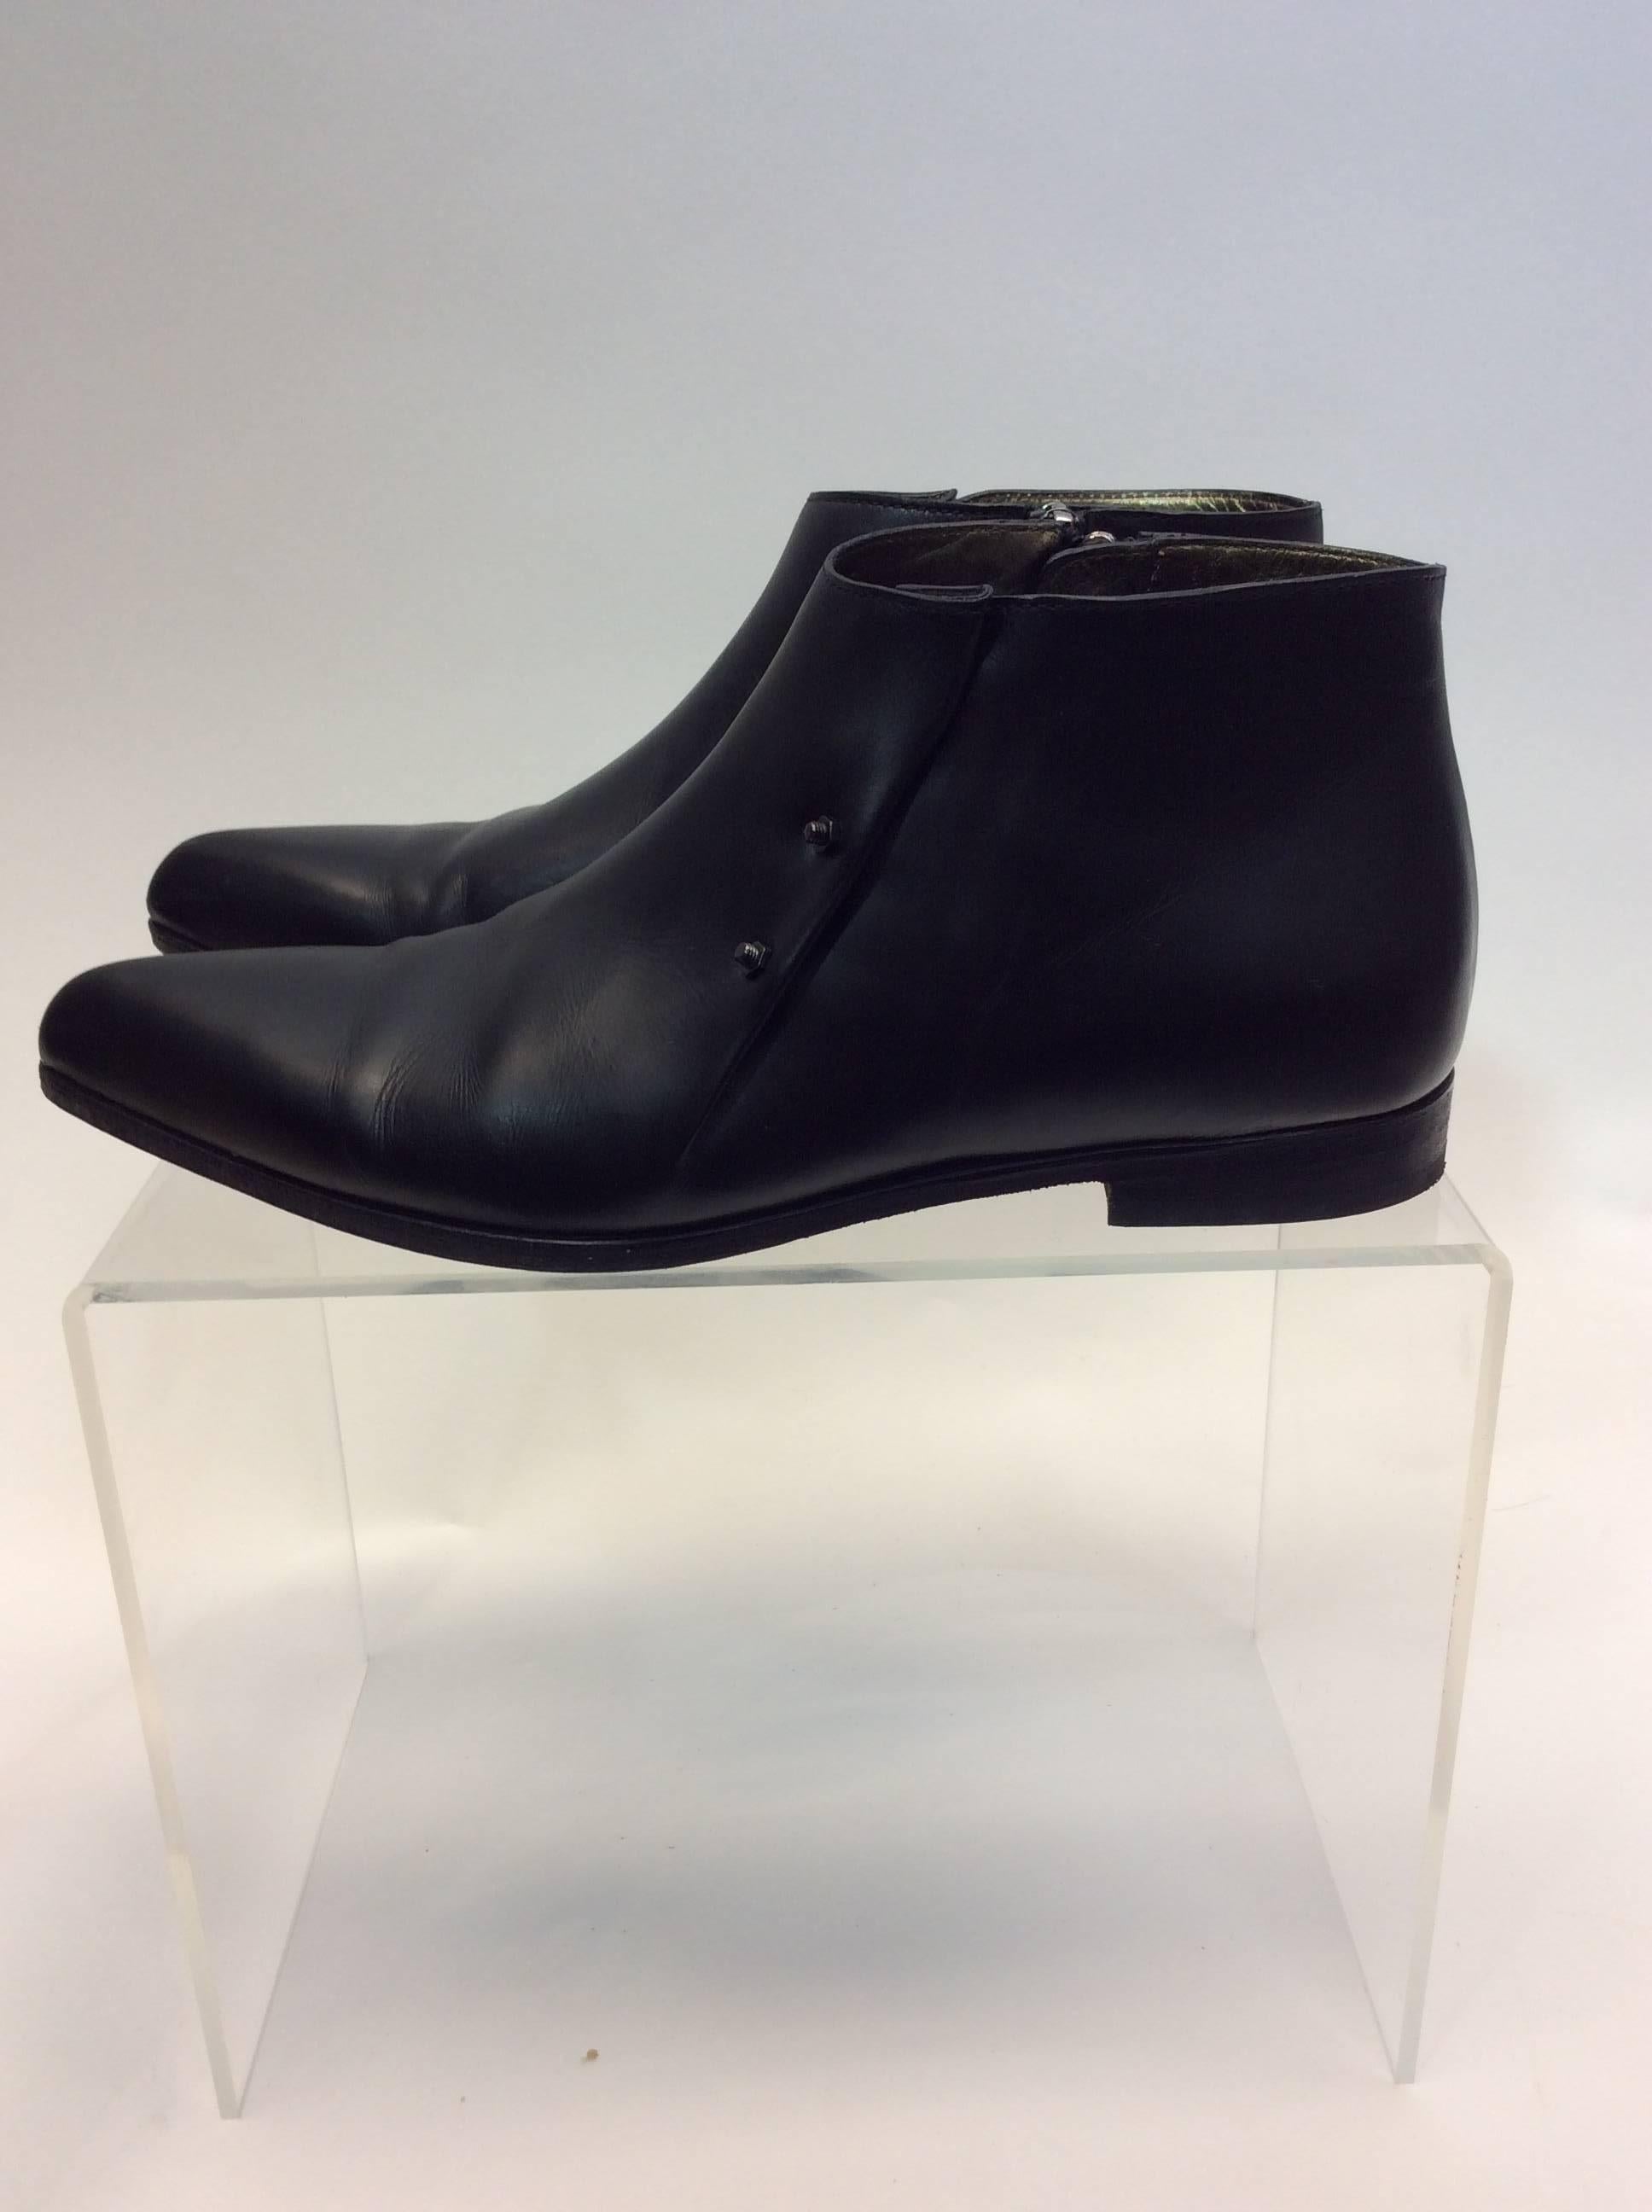 Lanvin Black Short Ankle Leather Boots In Excellent Condition For Sale In Narberth, PA